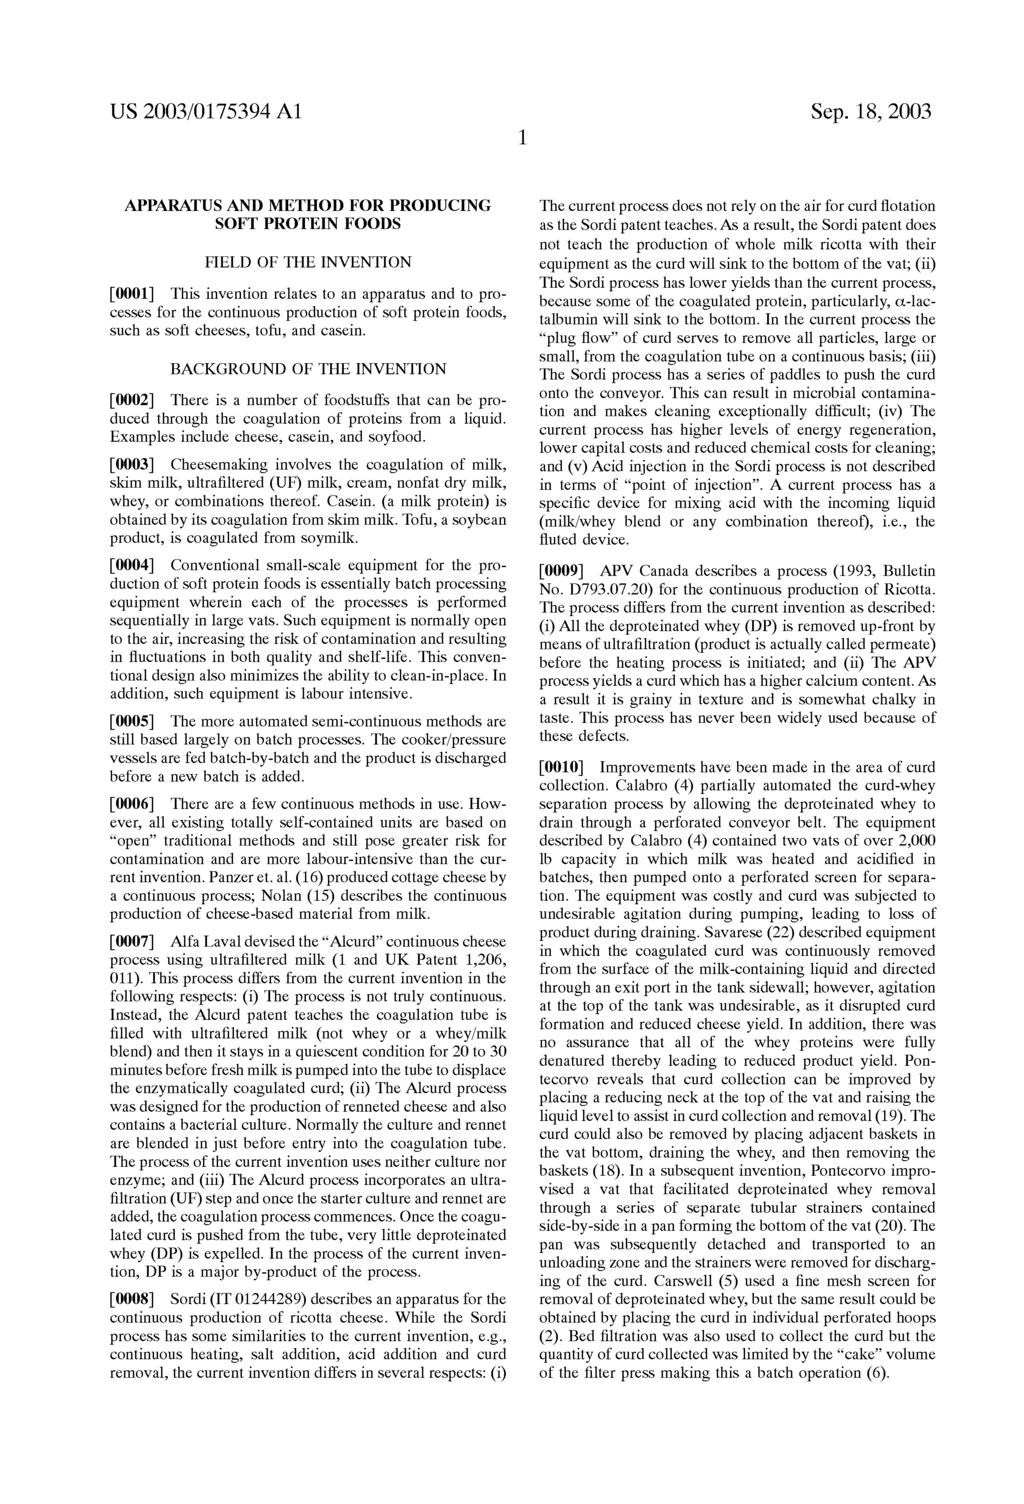 APPARATUS AND METHOD FOR PRODUCING SOFT PROTEIN FOODS FIELD OF THE INVENTION 0001.